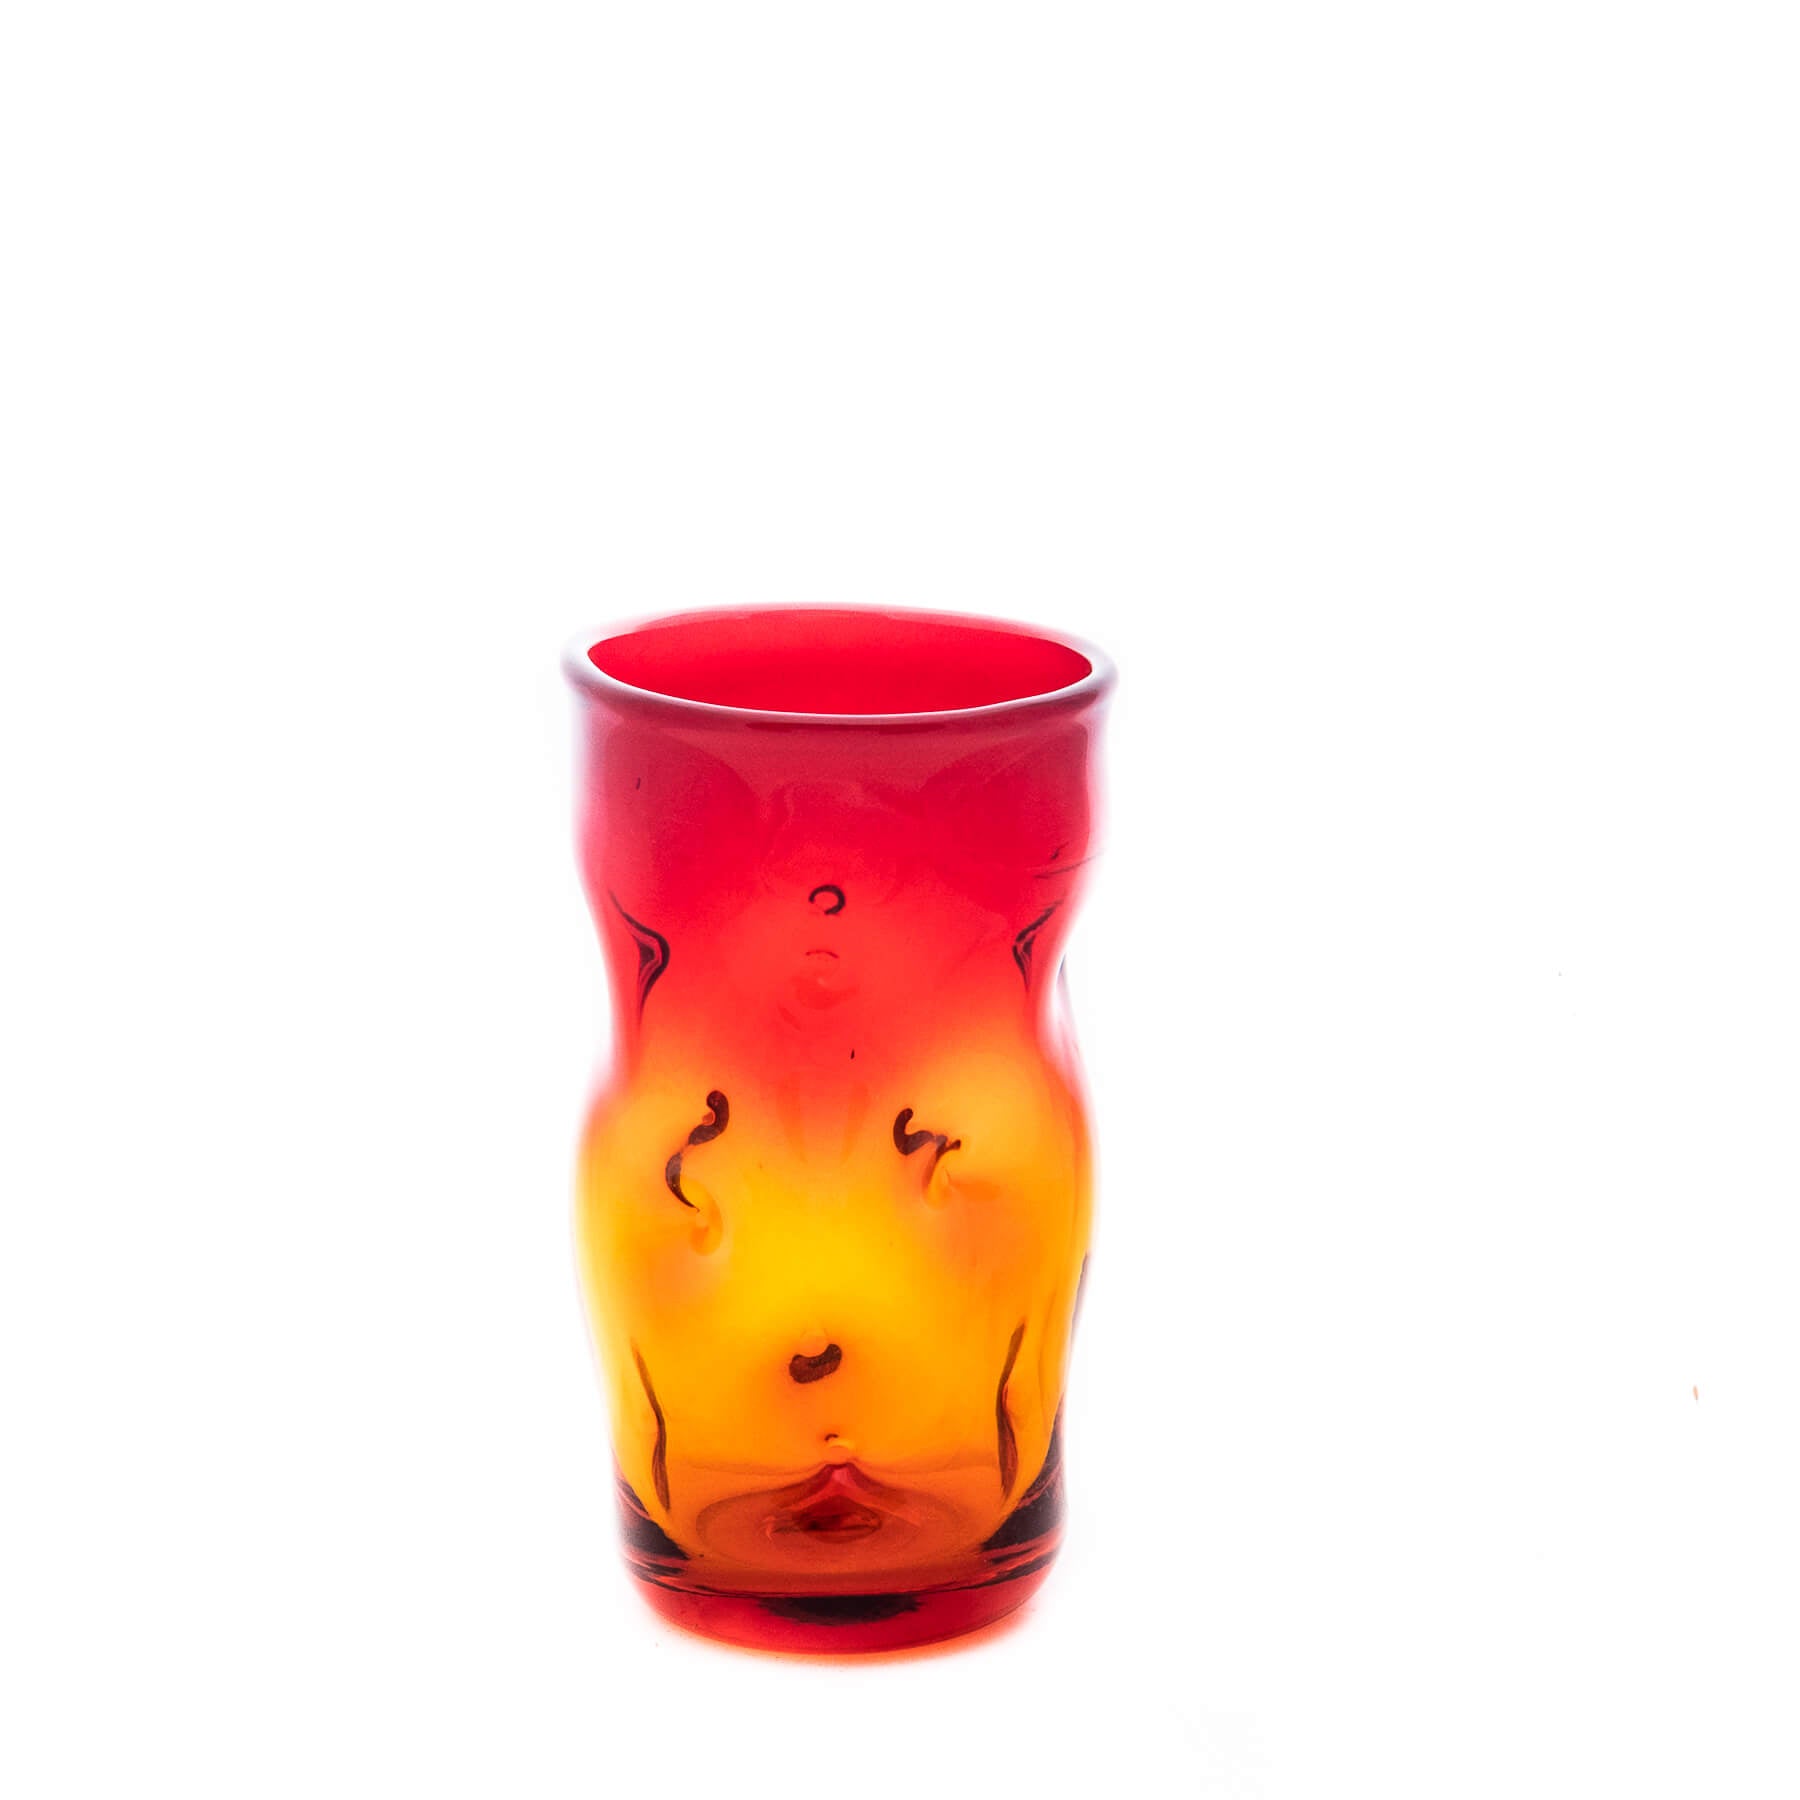 Product photo for Blenko 418L Large Dimple Glass - Tangerine